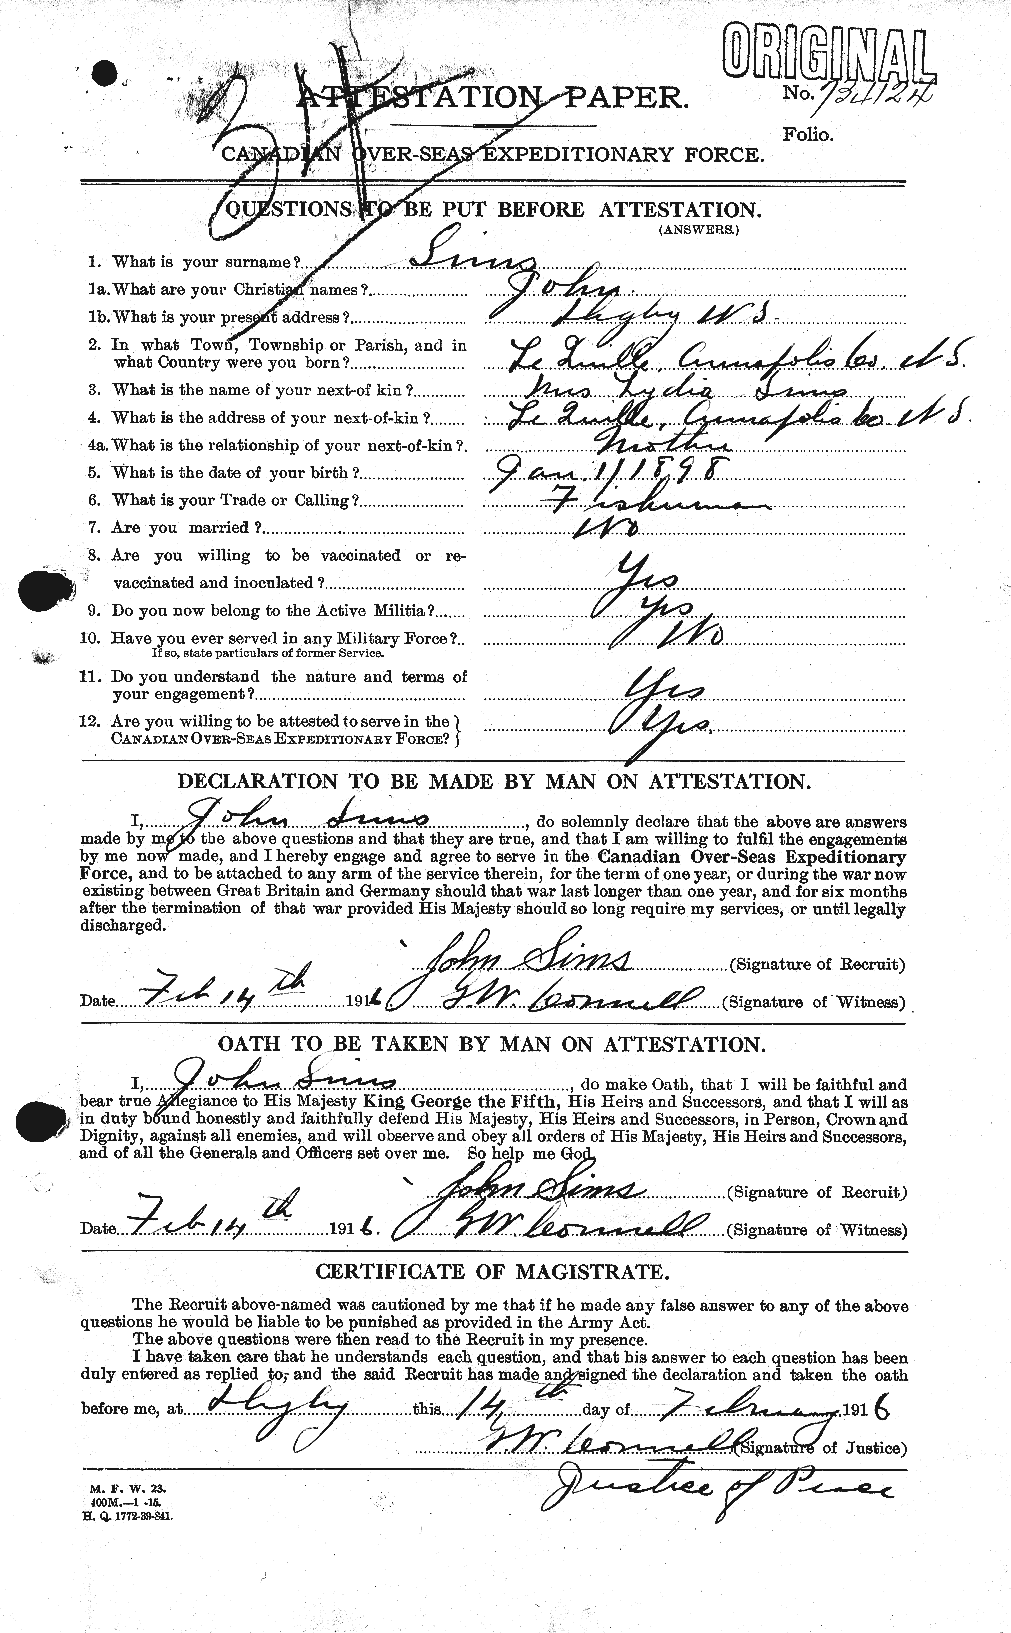 Personnel Records of the First World War - CEF 097385a